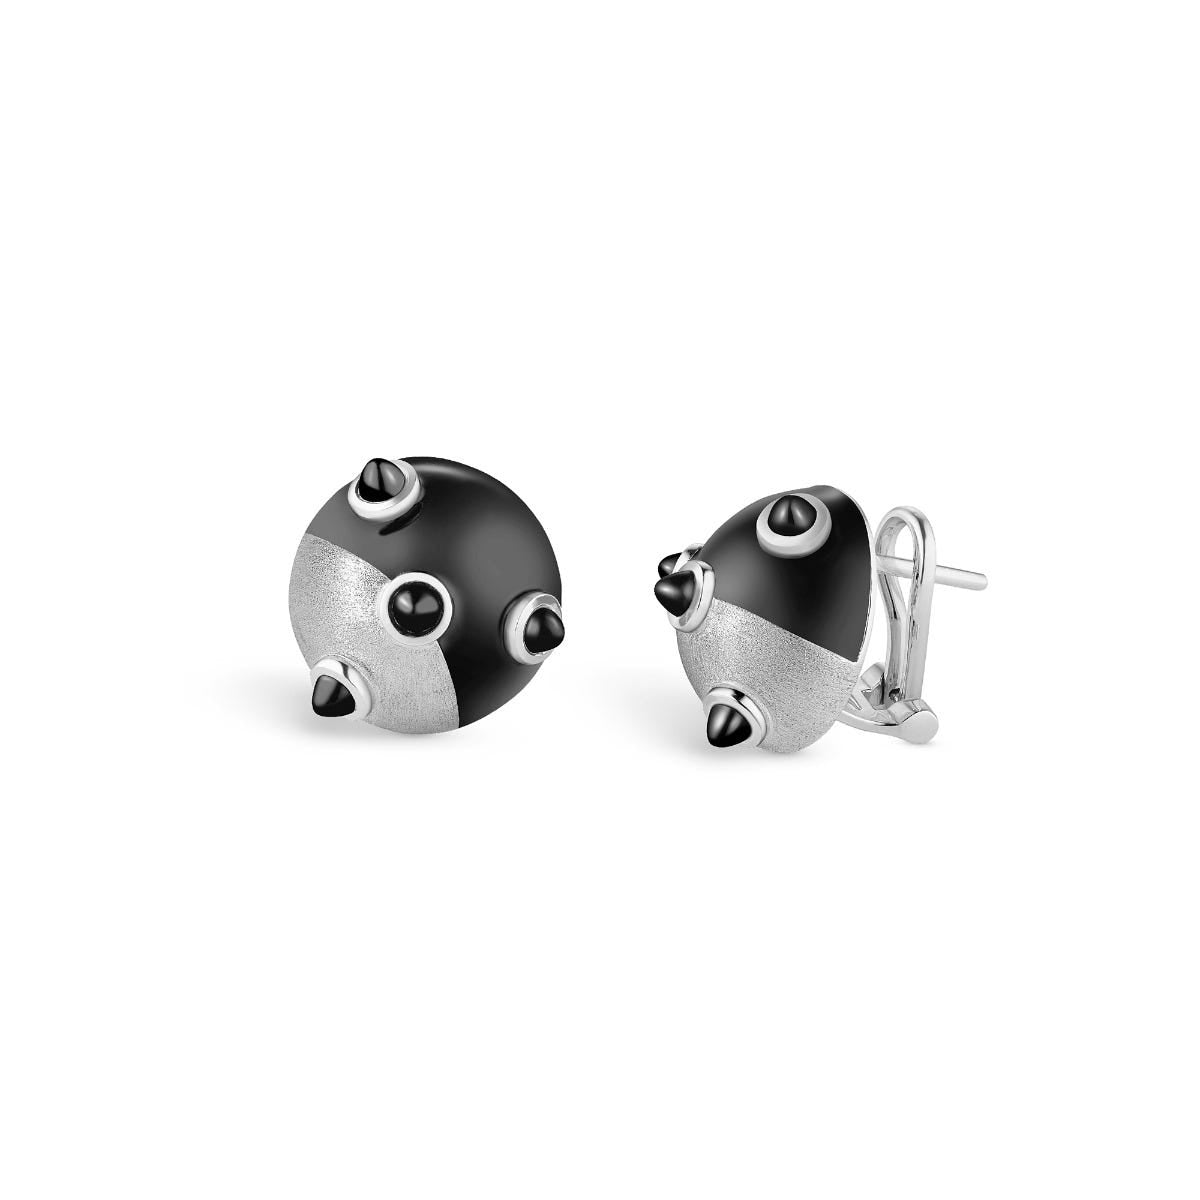 Cosmic Sputnik Eclipse Earrings in 18ct White Gold with Onyx